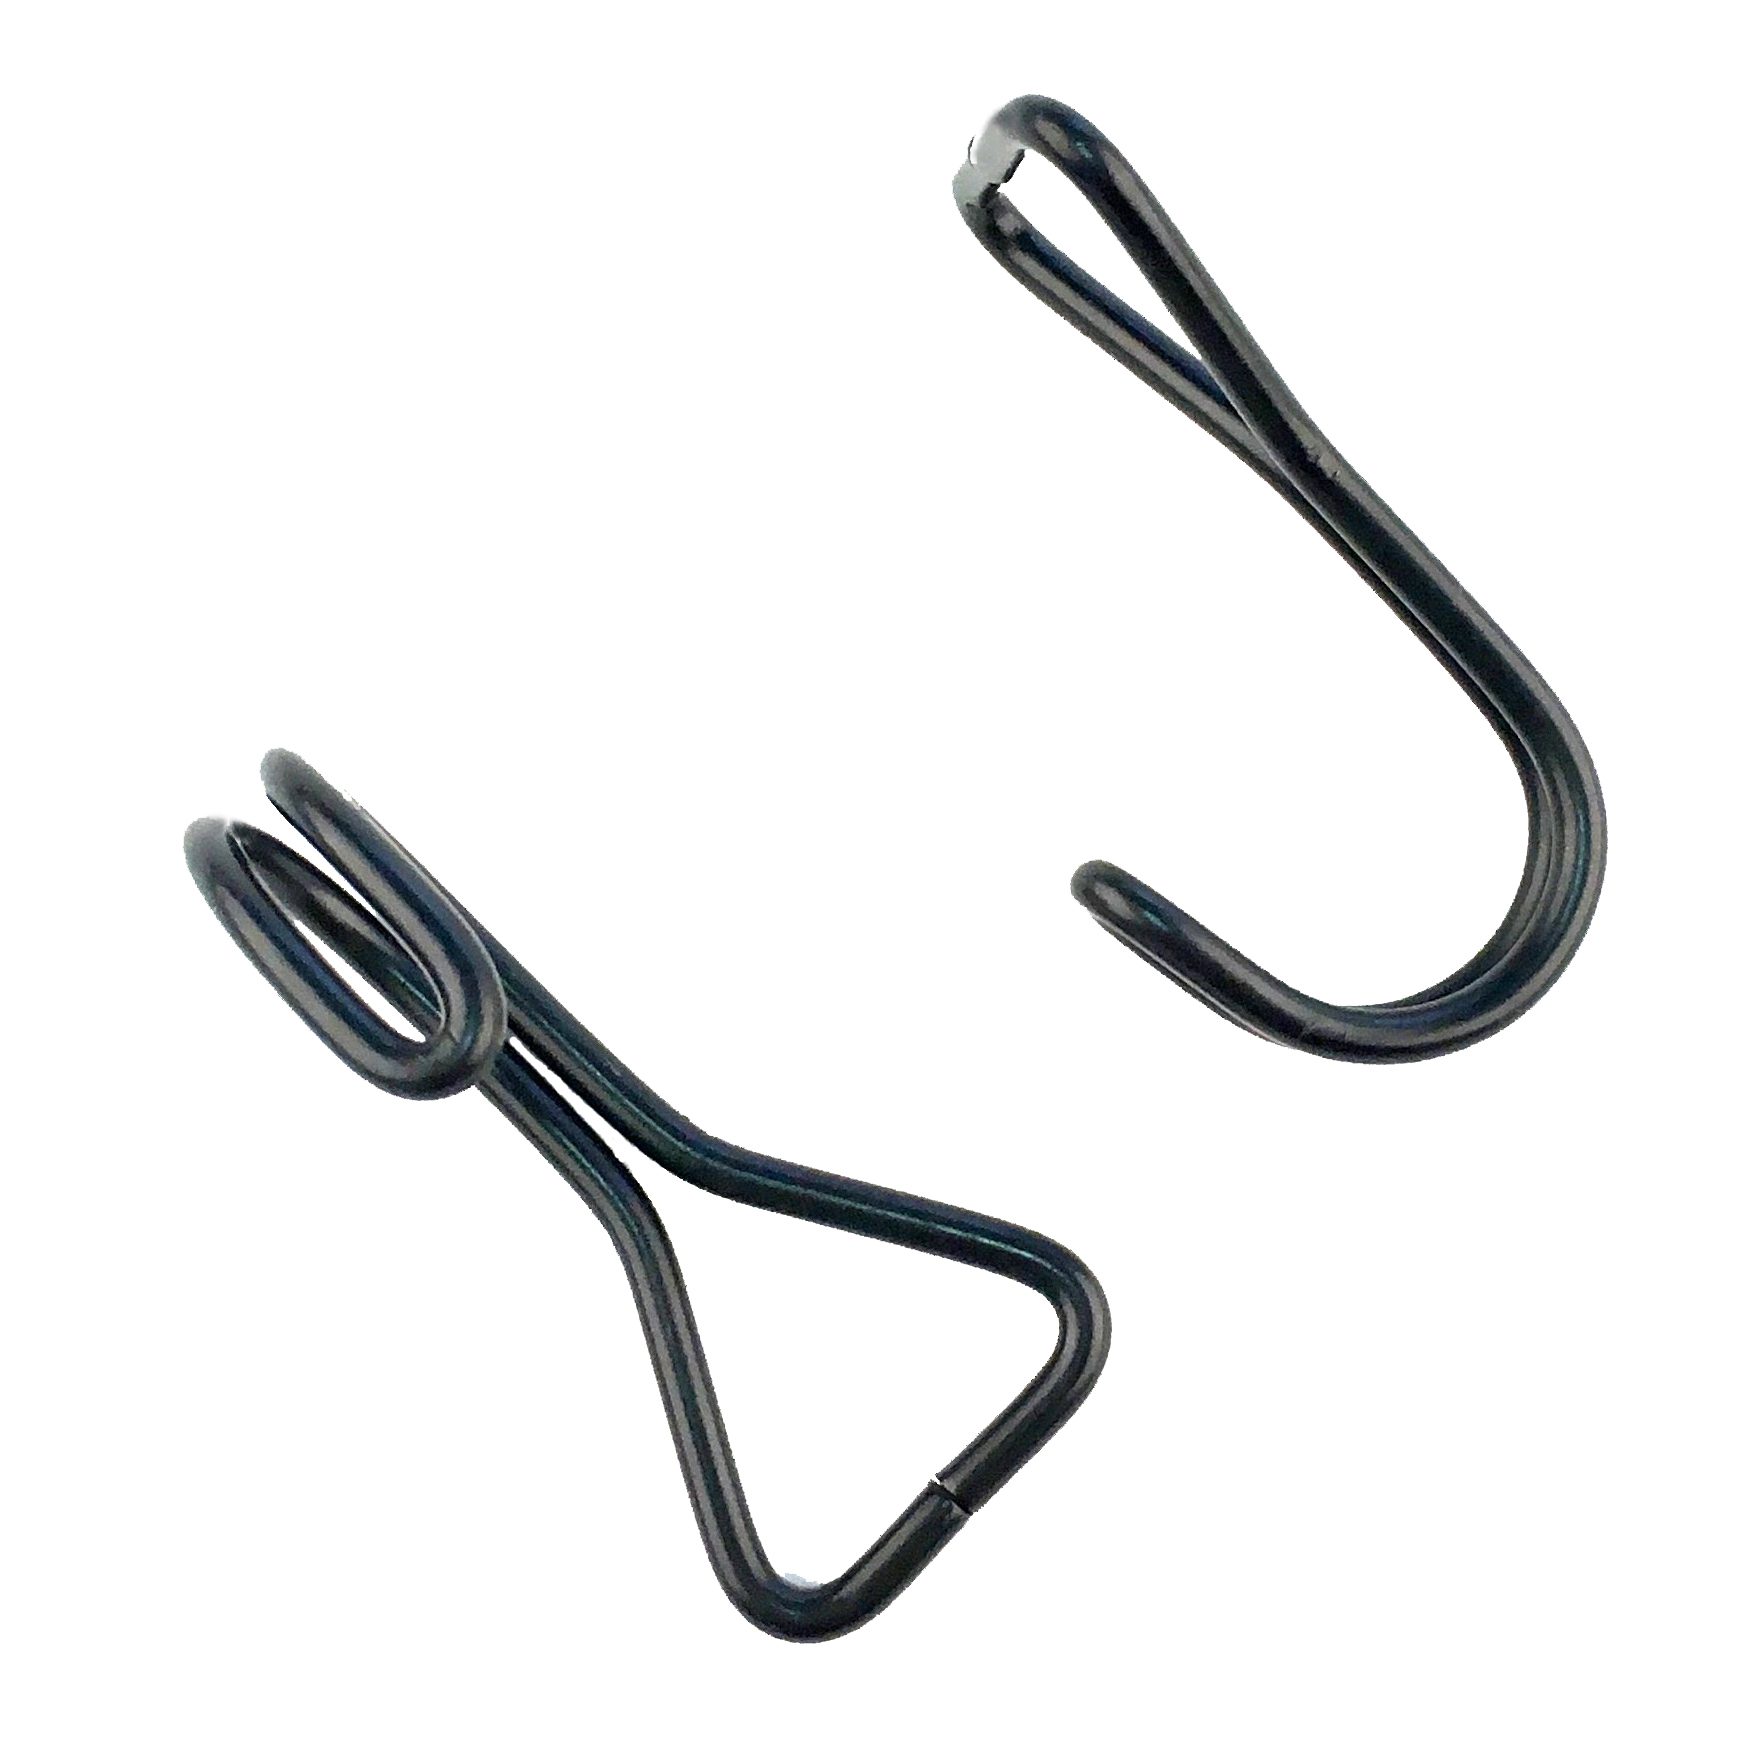 Flat bungee cords fitting double wire hooks